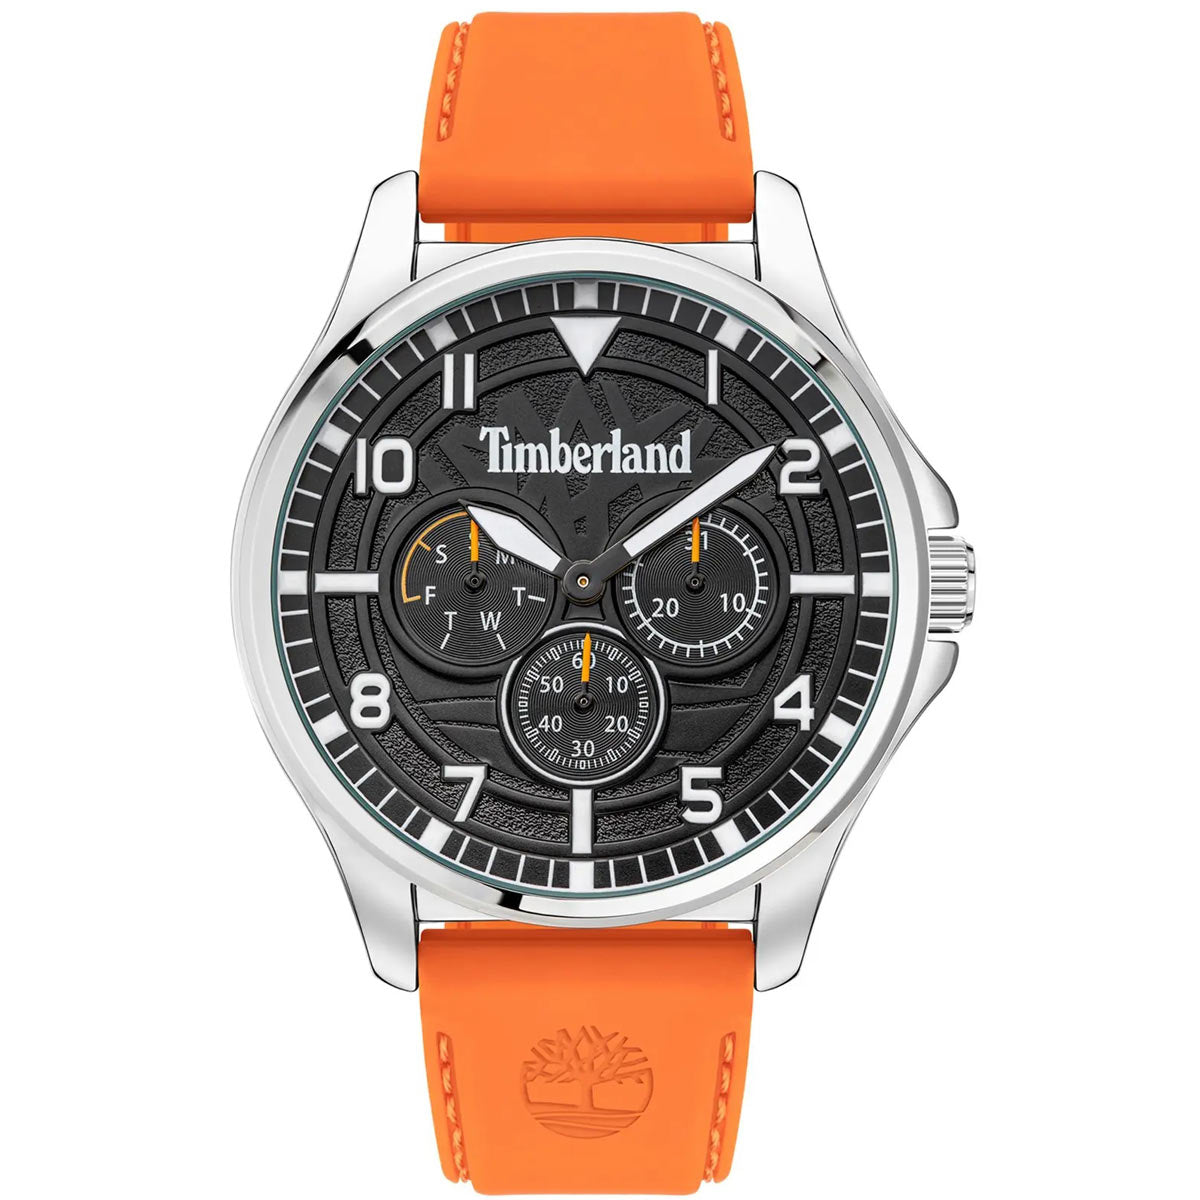 Timberland Men's Chronograph Watch - Orange Silicone Rubber Strap | TD